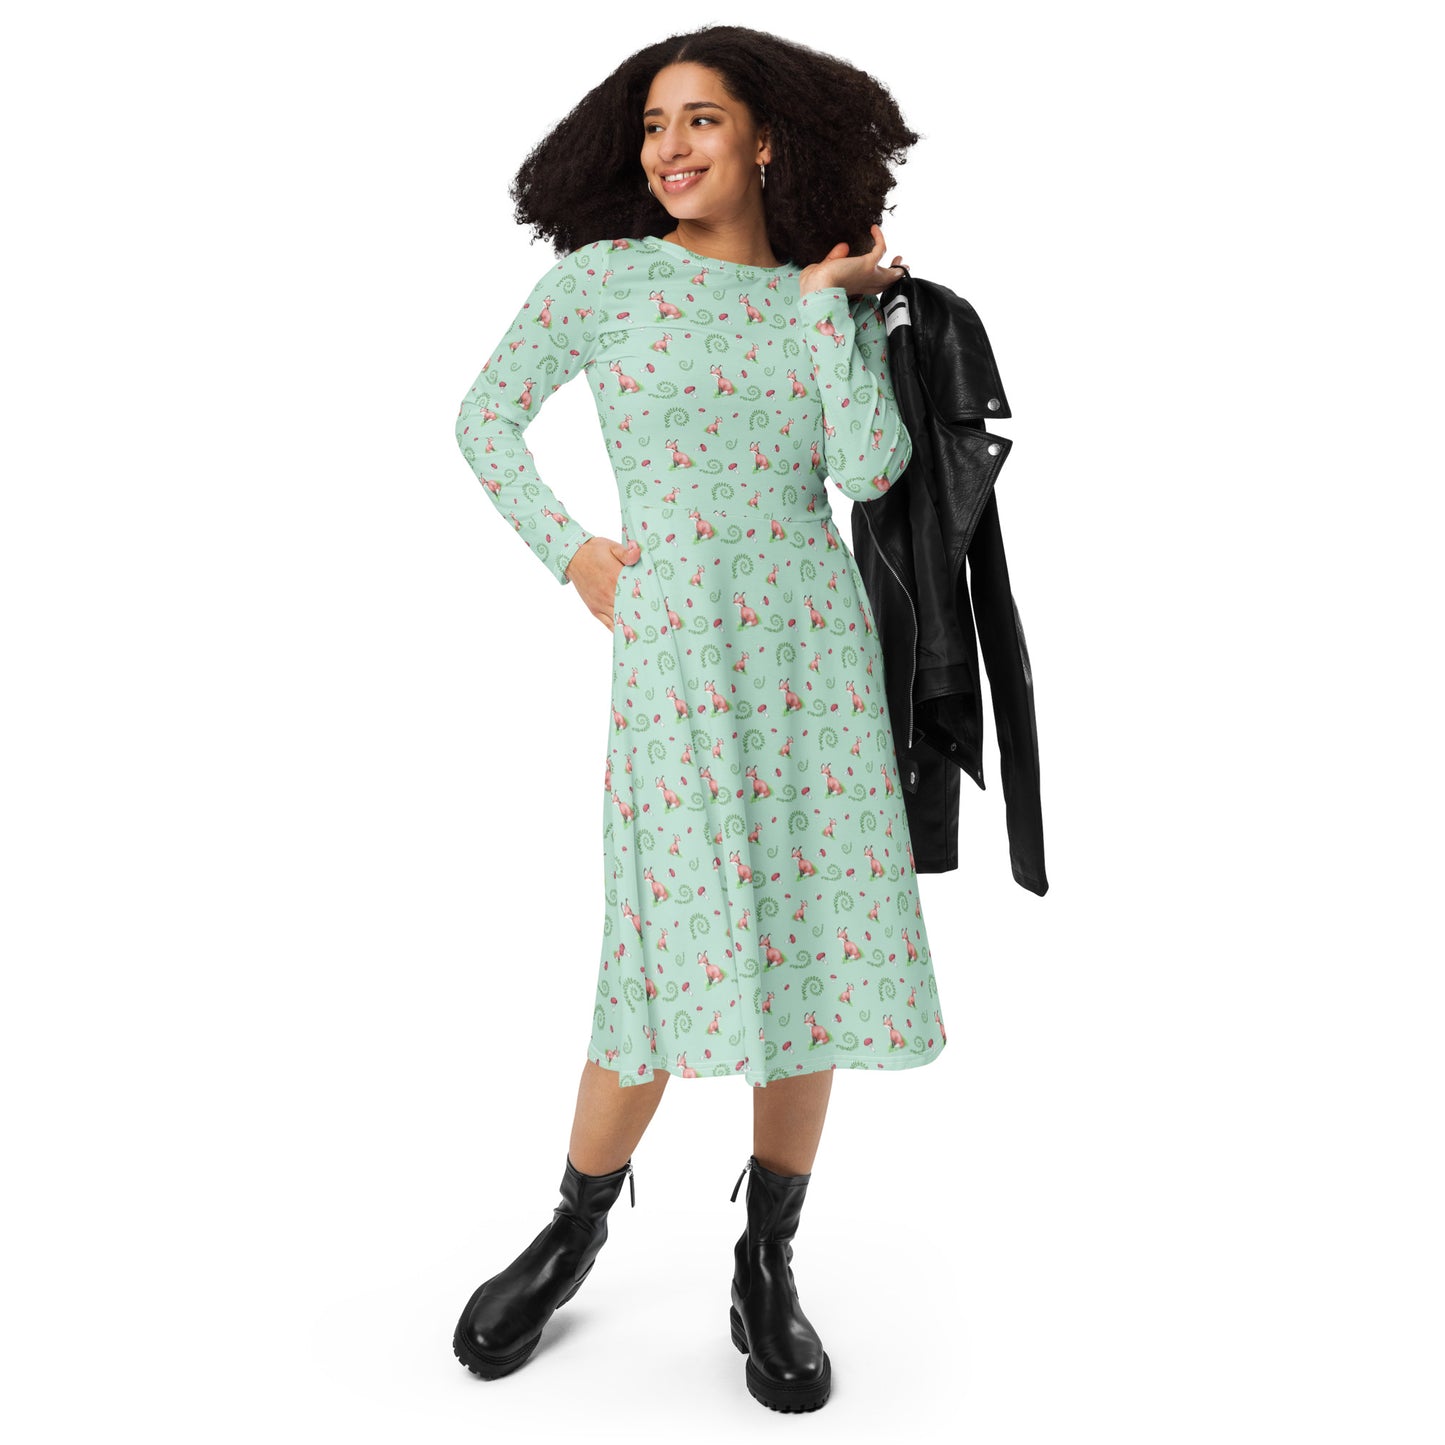 Forest fox patterned long sleeve midi dress with side pockets. Has watercolor foxes, mushrooms, and ferns on a light green fabric. Features boat neckline and fitted elastic waist. Shown on female model with black jacket on her shoulder.